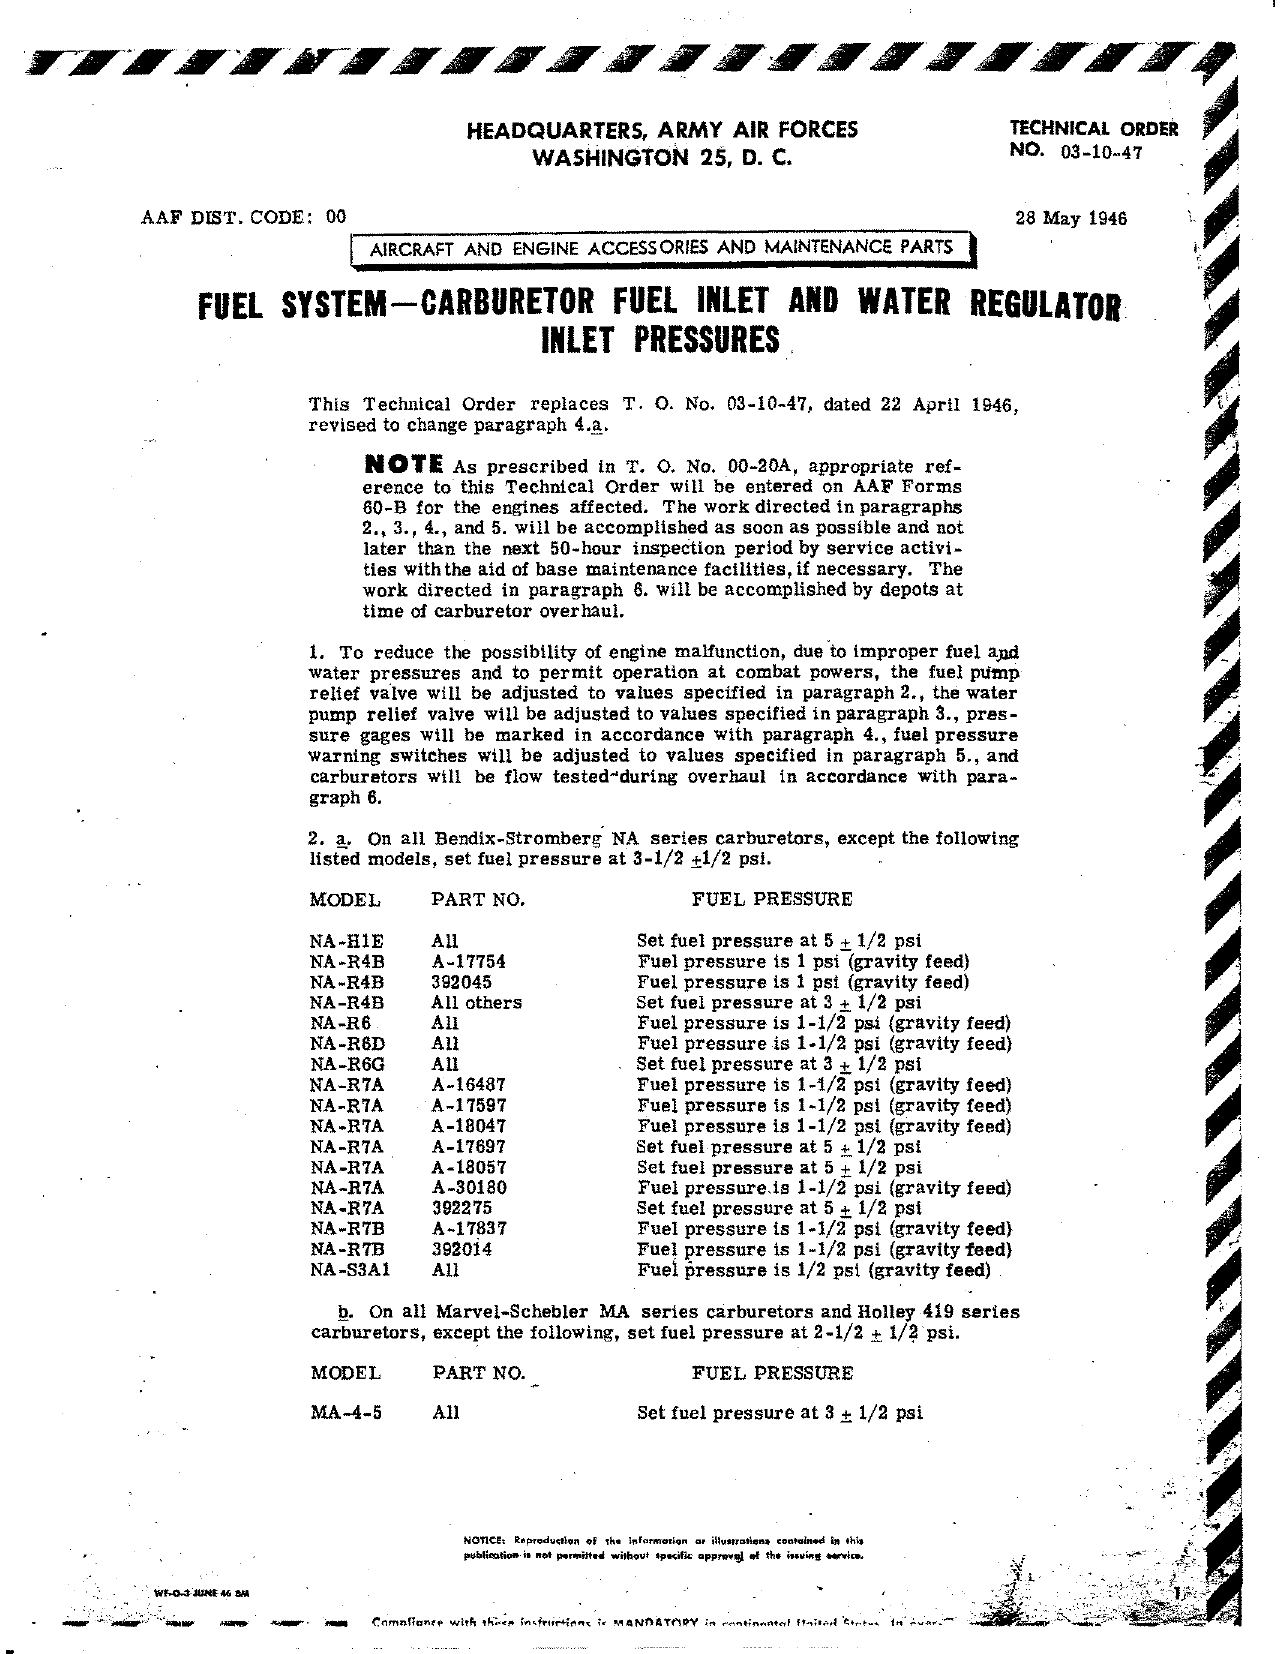 Sample page 3 from AirCorps Library document: Handbook Overhaul Instructions for Injection Carburetors